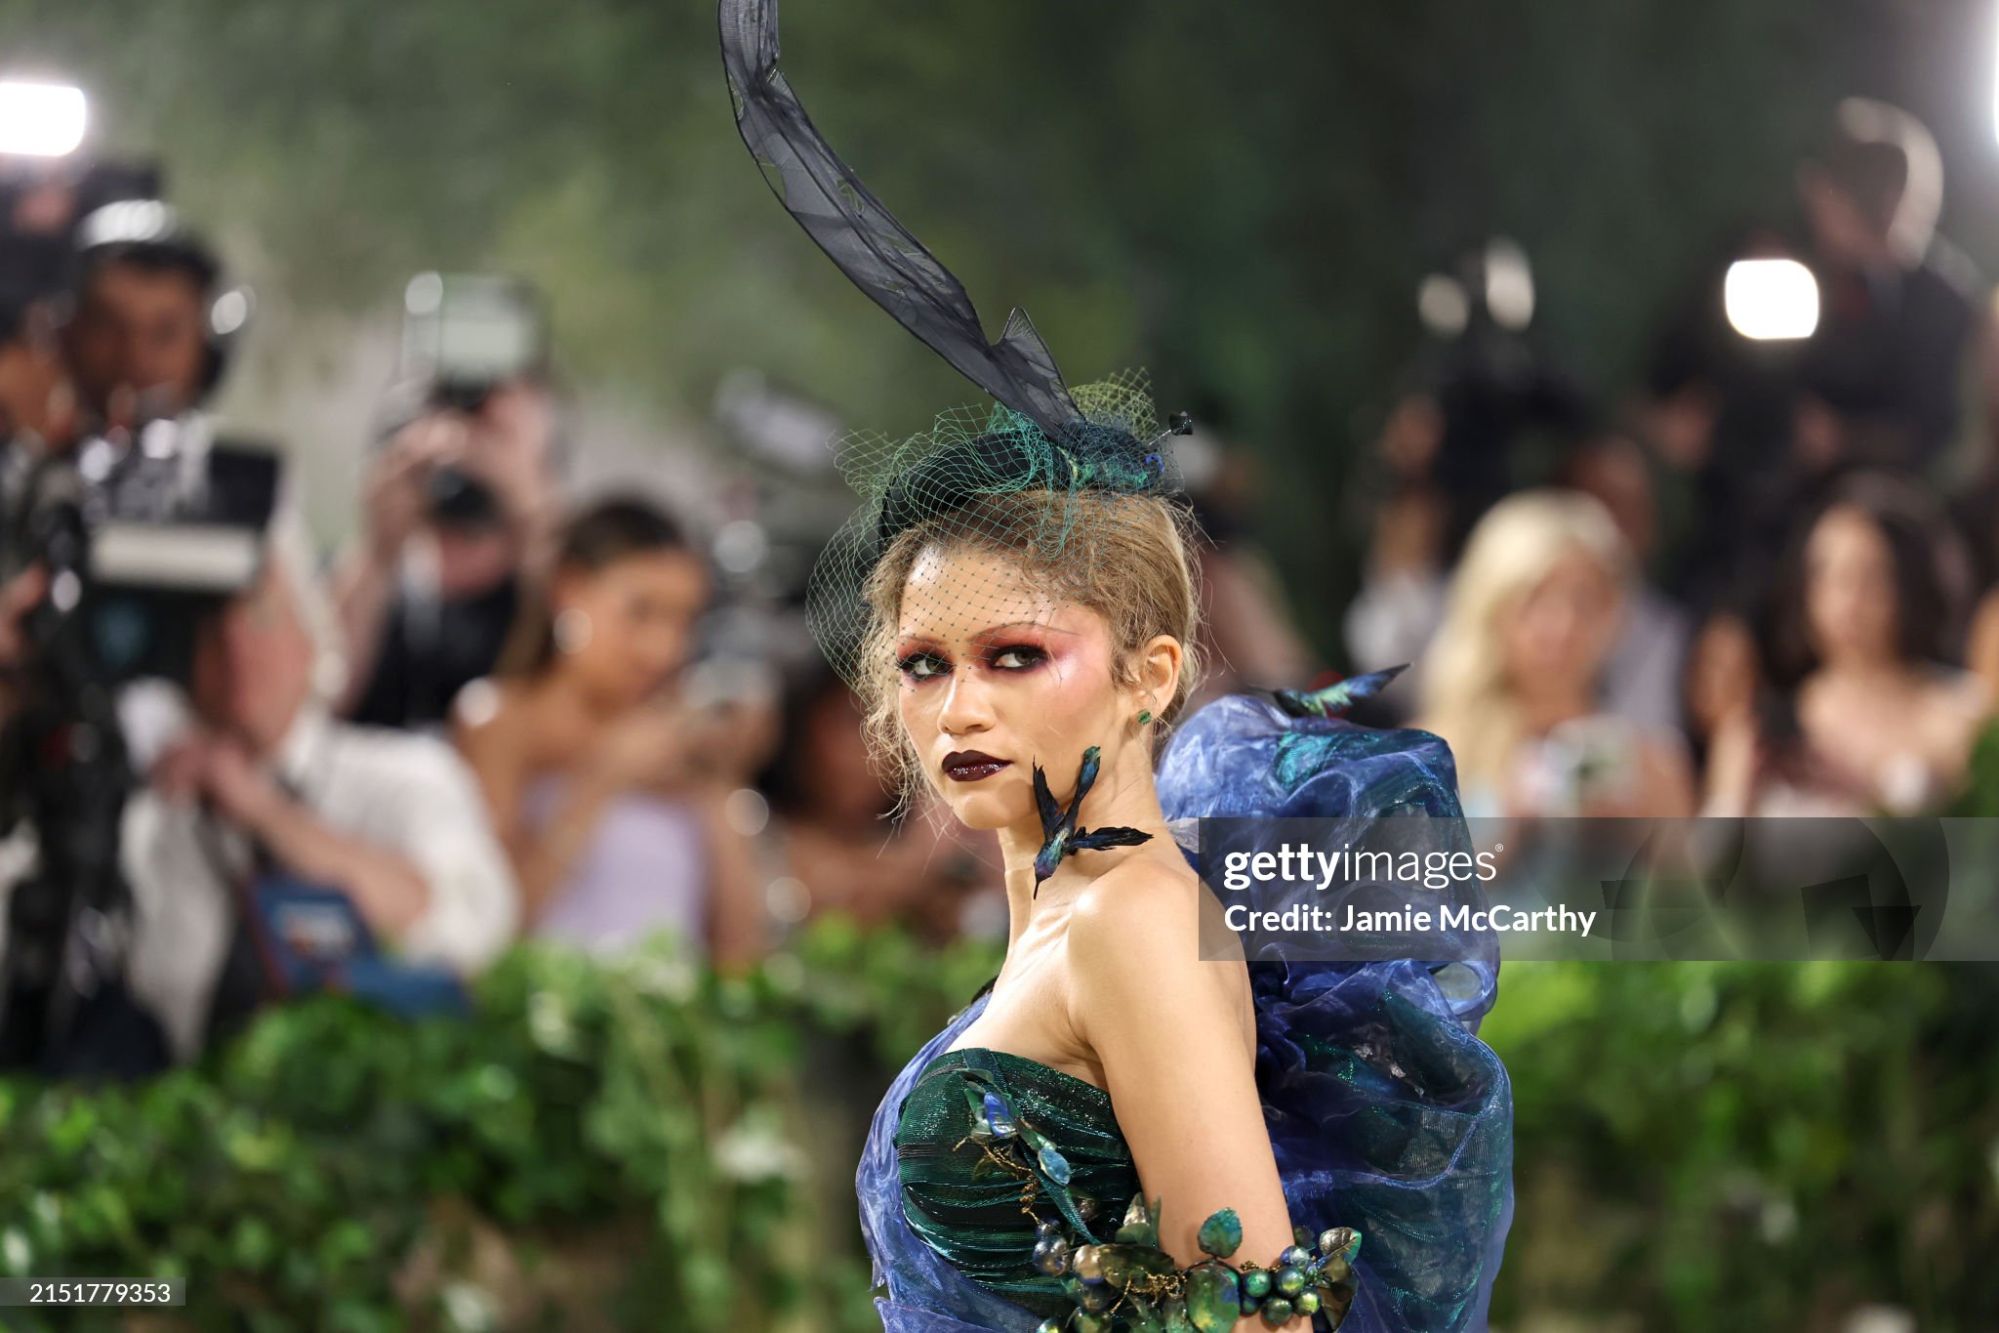 gettyimages-2151779353-2048x2048.jpg